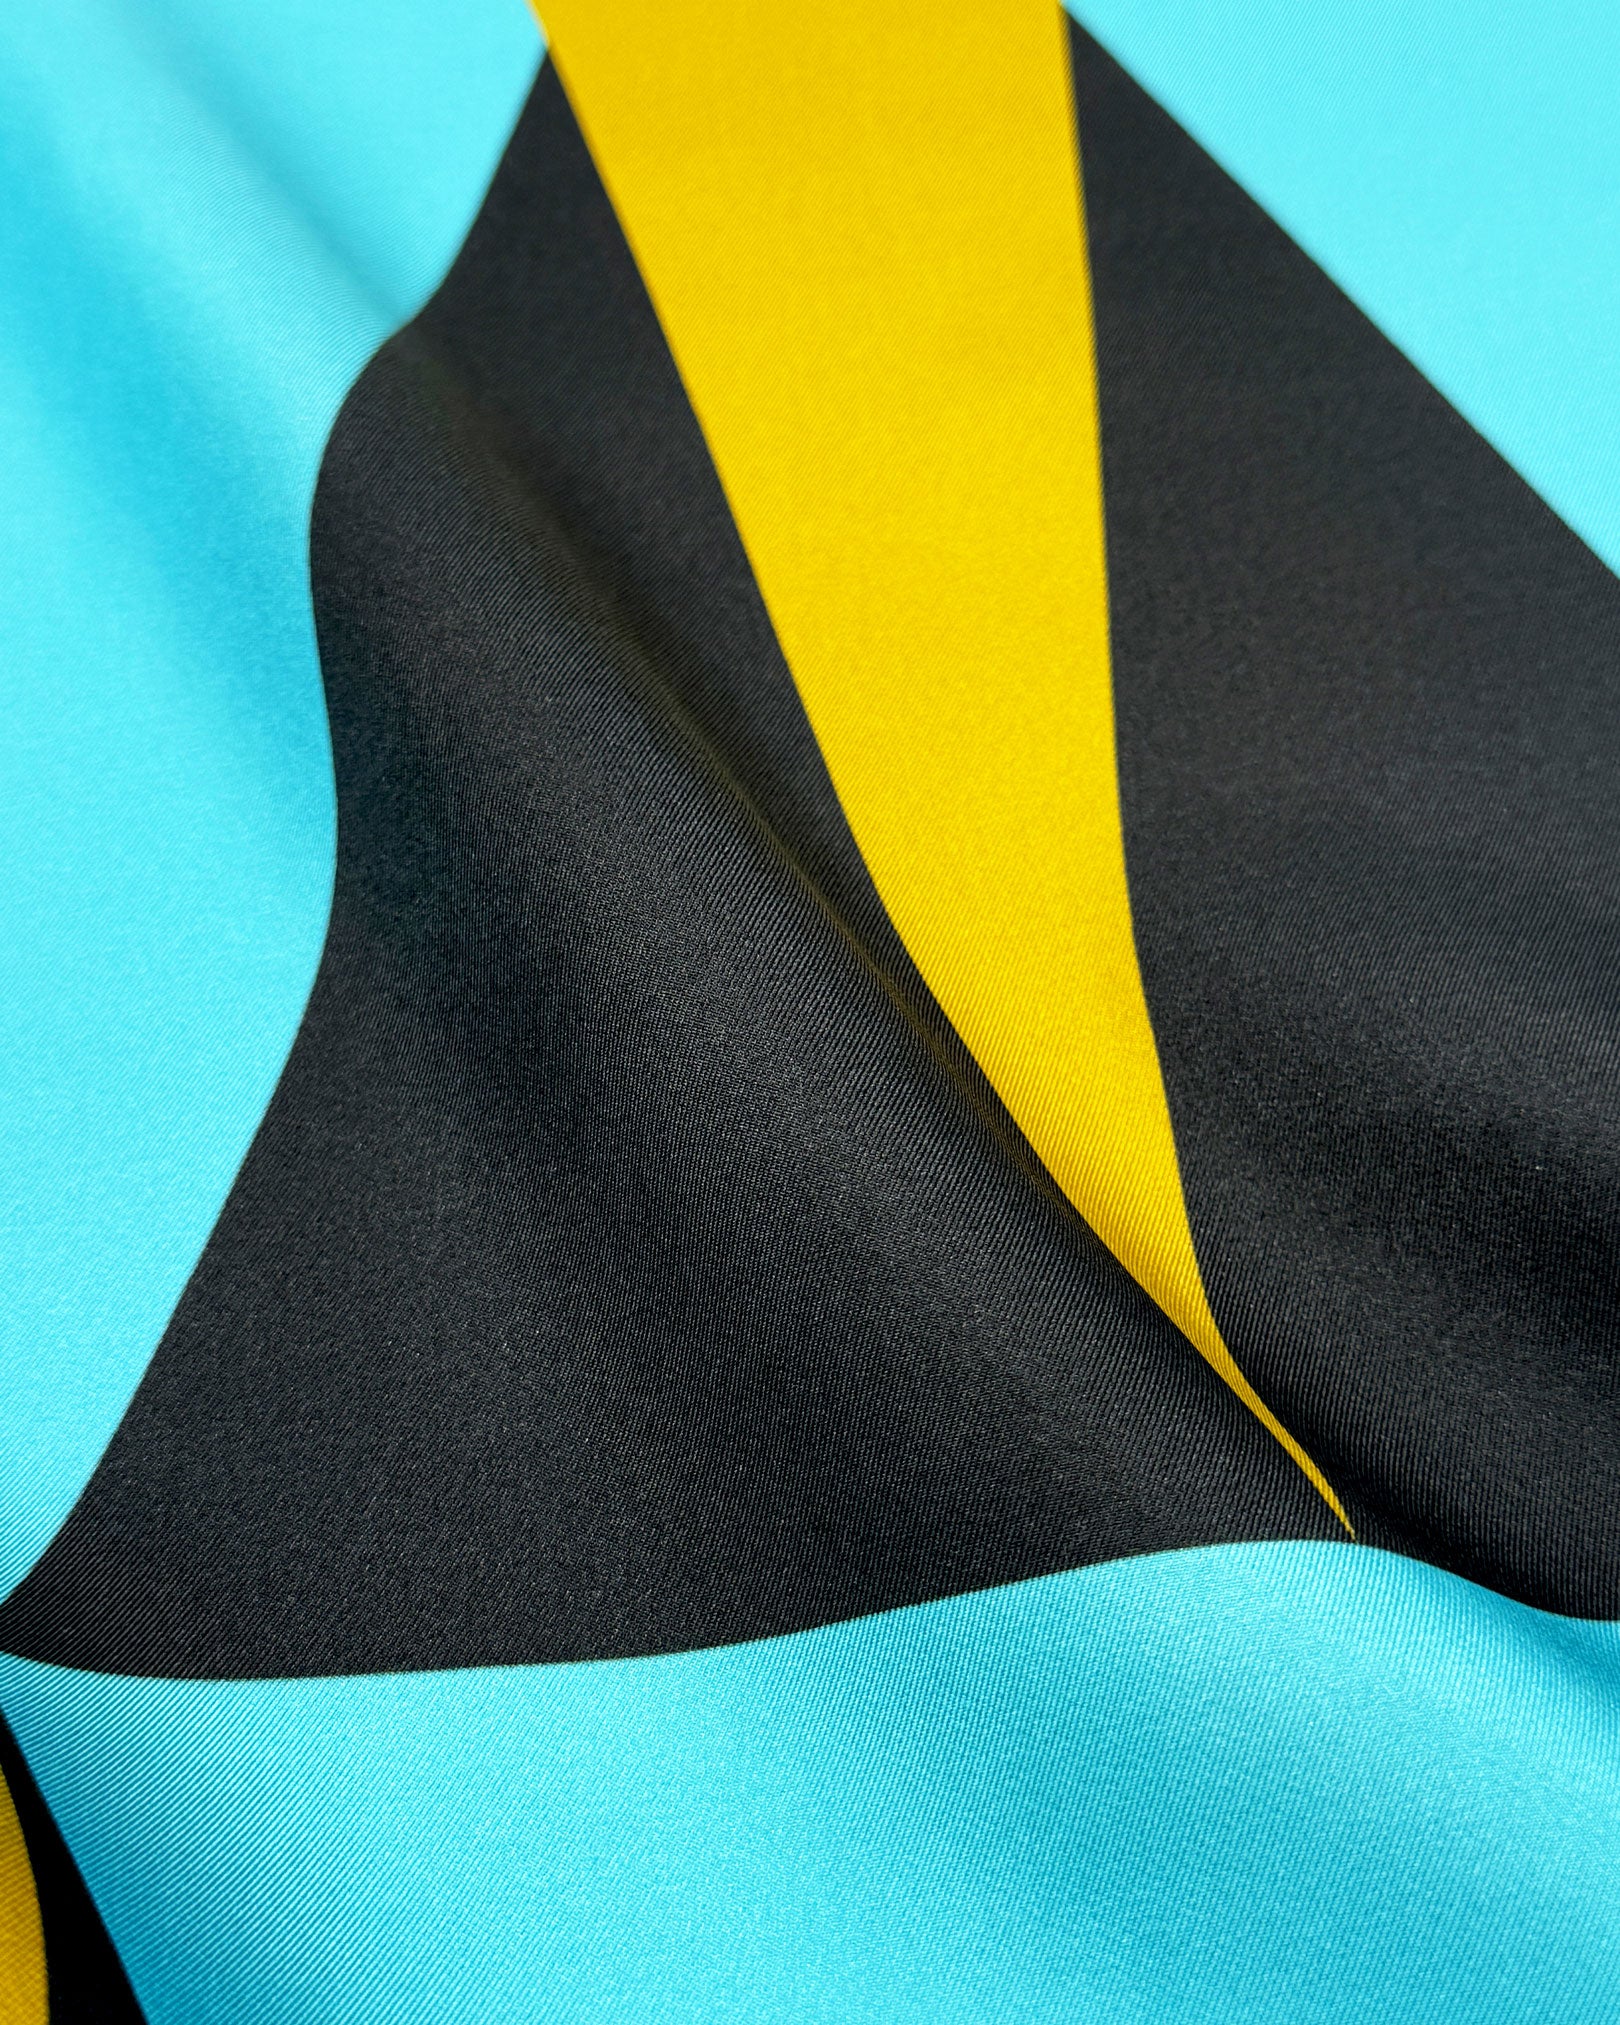 A ruffled close-up of the 'Leipzig' silk pocket square, presenting a closer view of the interplay of blue, grey and yellow triangles.